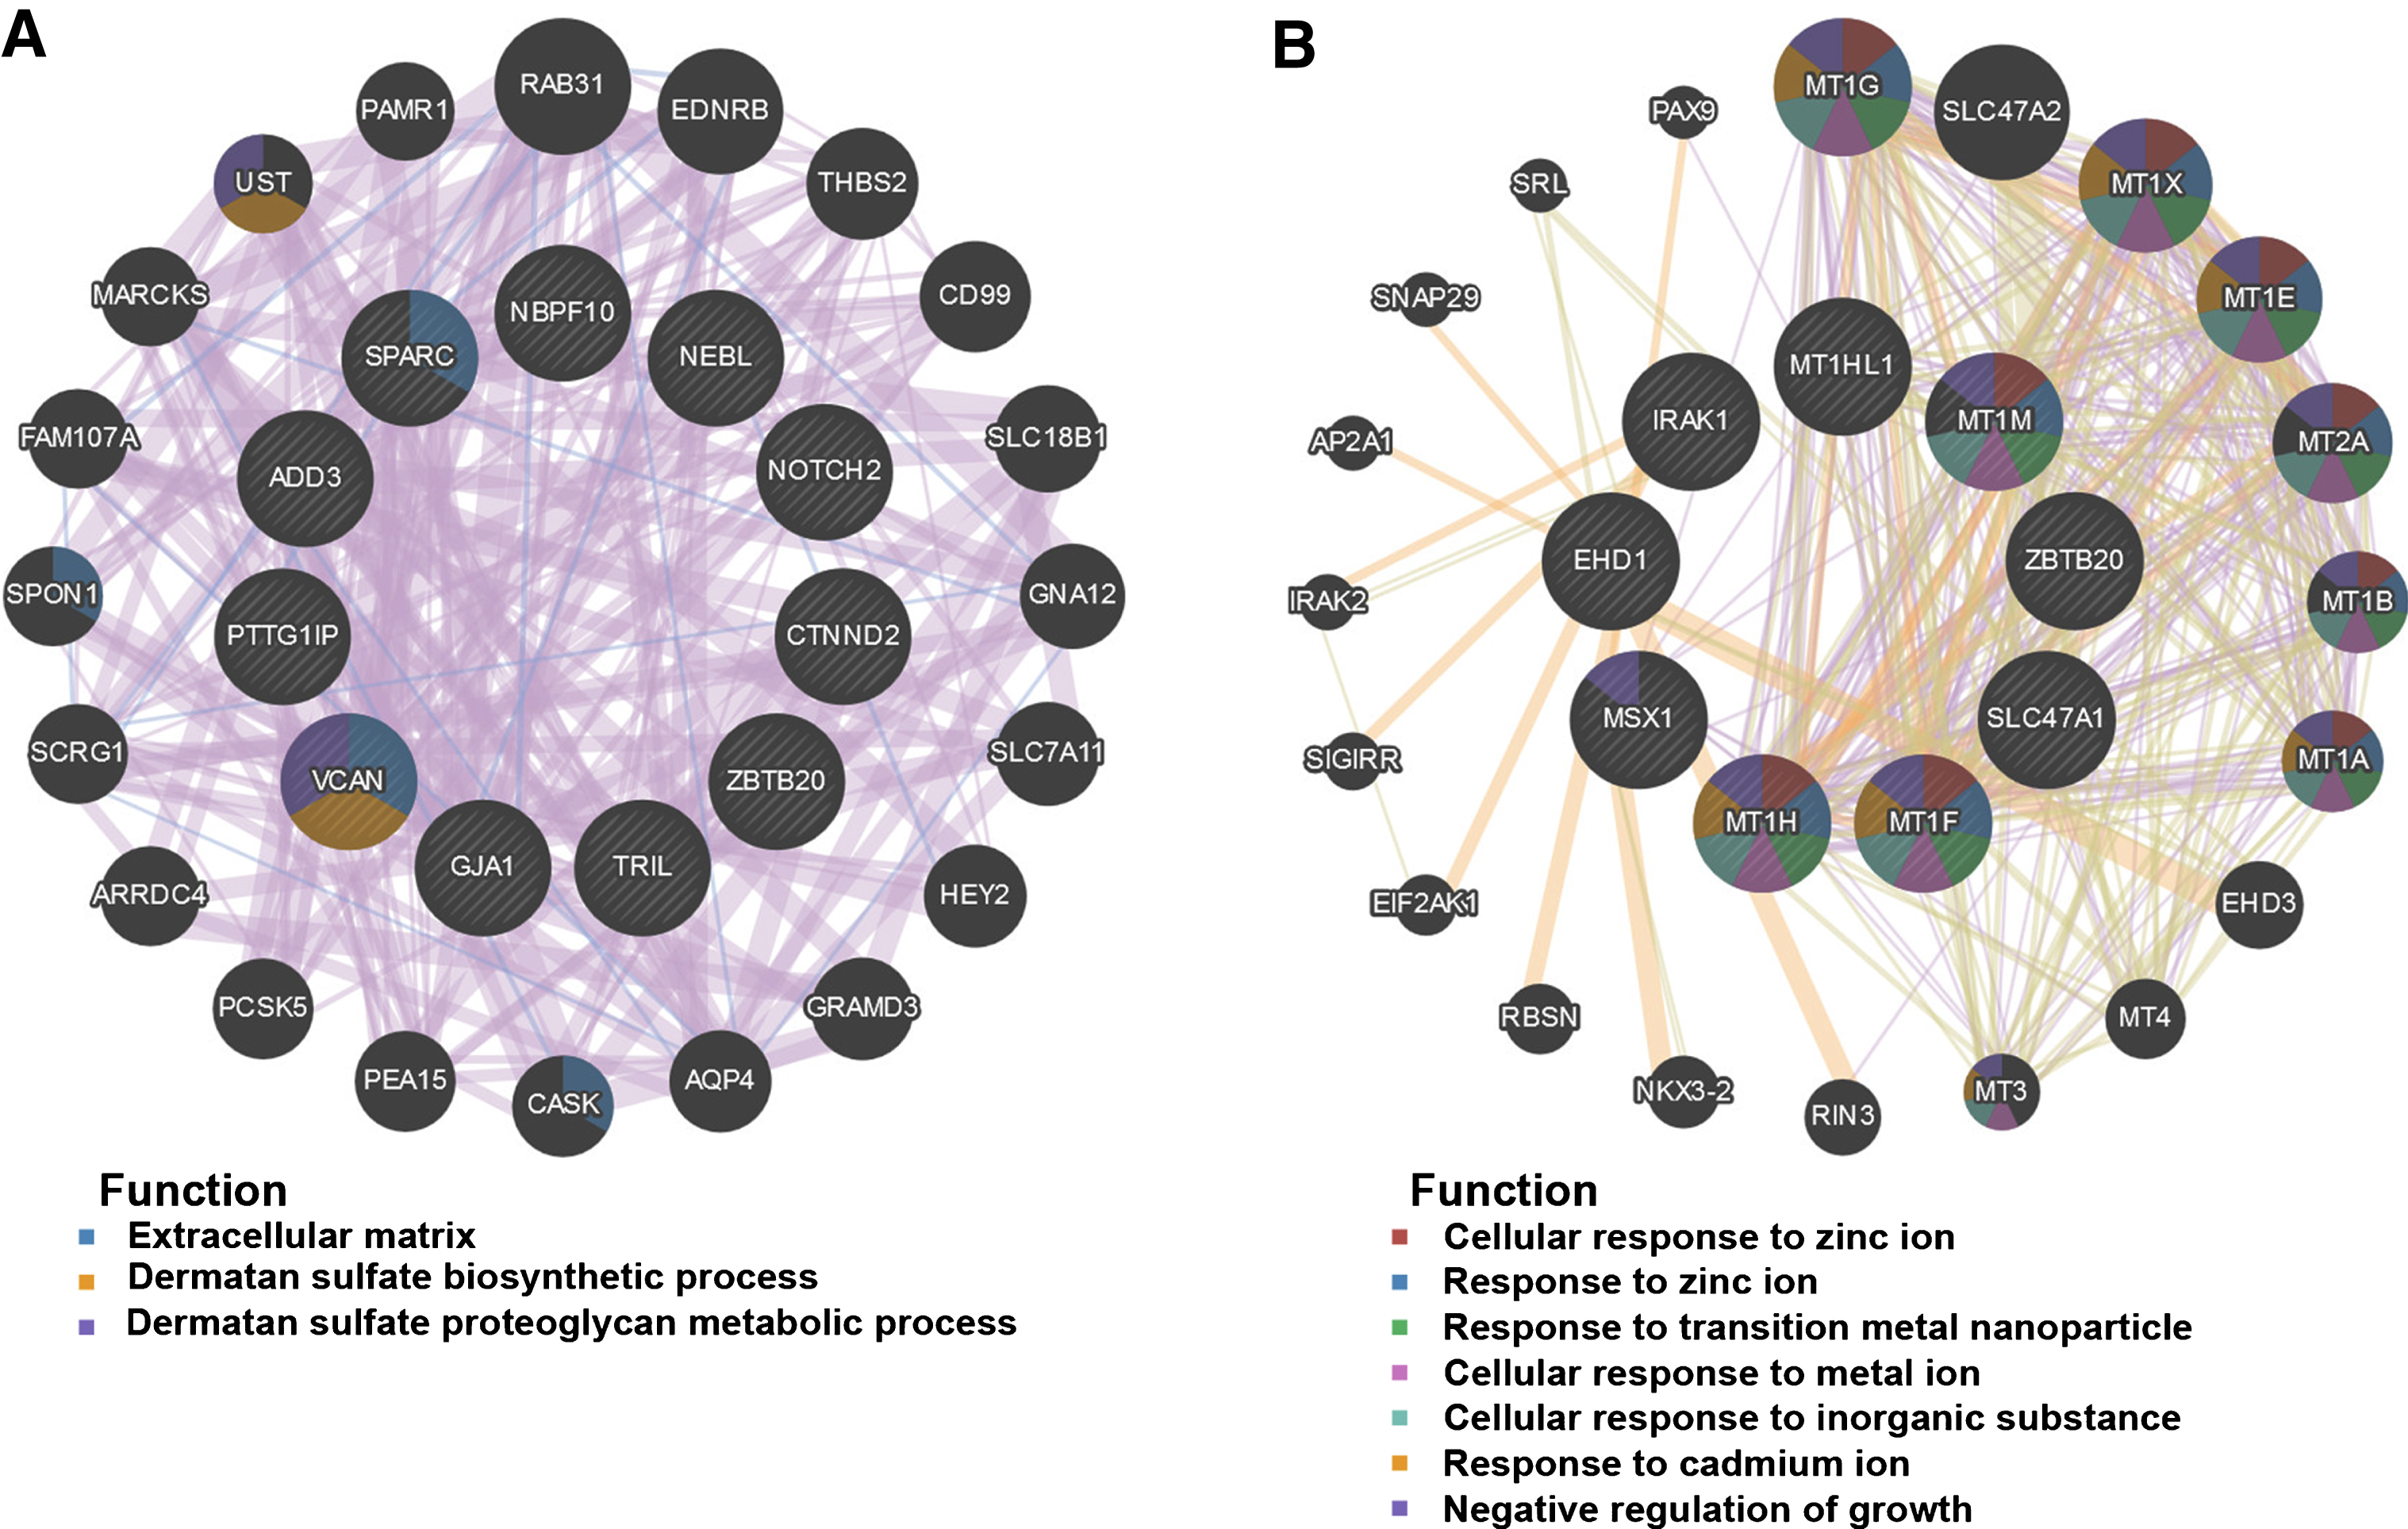 PPI network construction. The PPI network of salmon (A) and lightgreen module (B). Different colors in each node represent different functions as indicated. Function of genes in dark node was not revealed through the analysis.